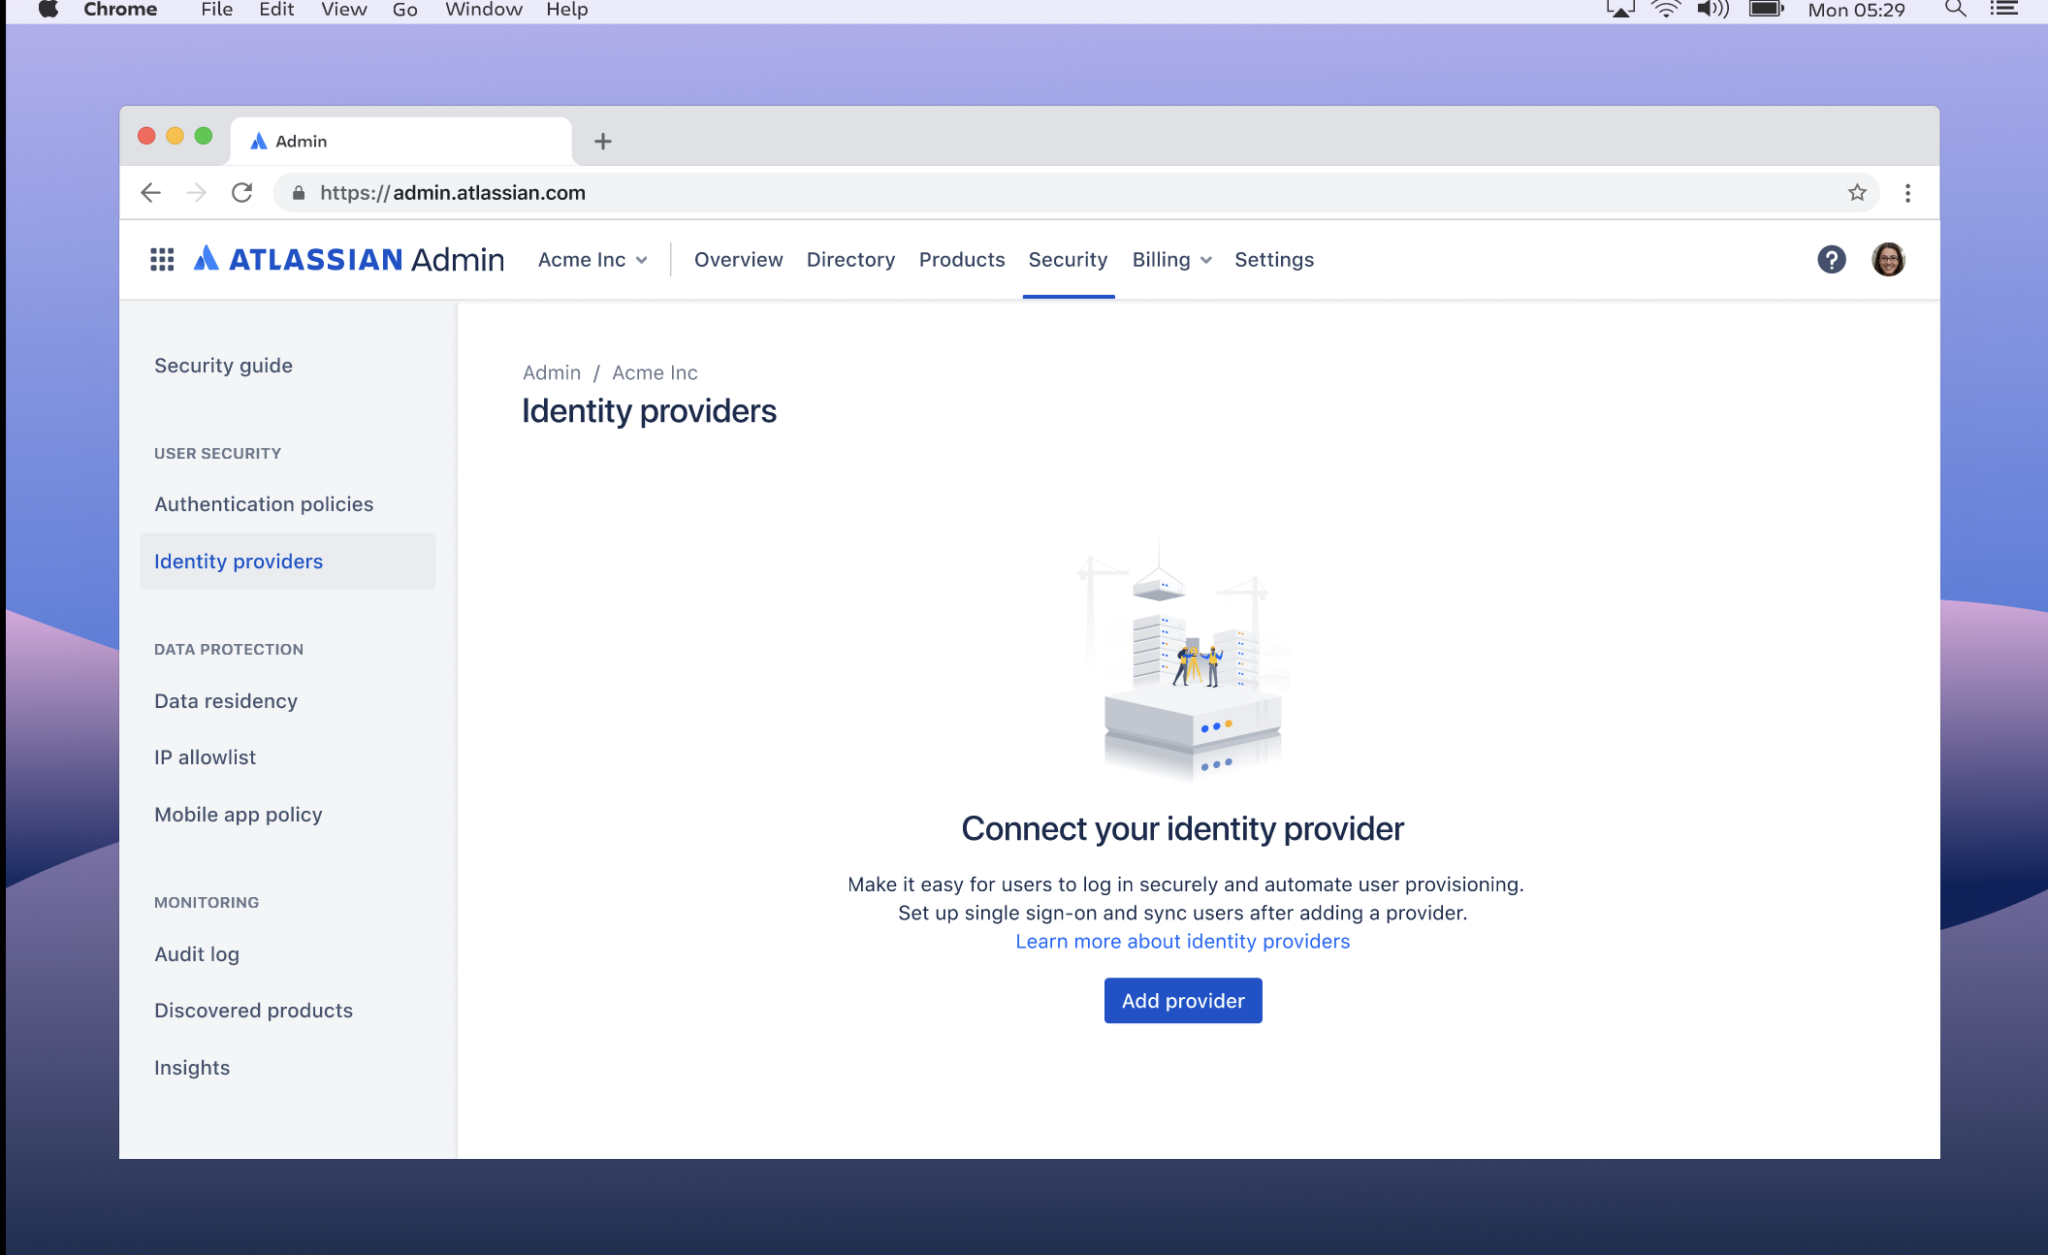 Admins can now add Identify providers they want to enable in their company within the Atlassian Administration hub